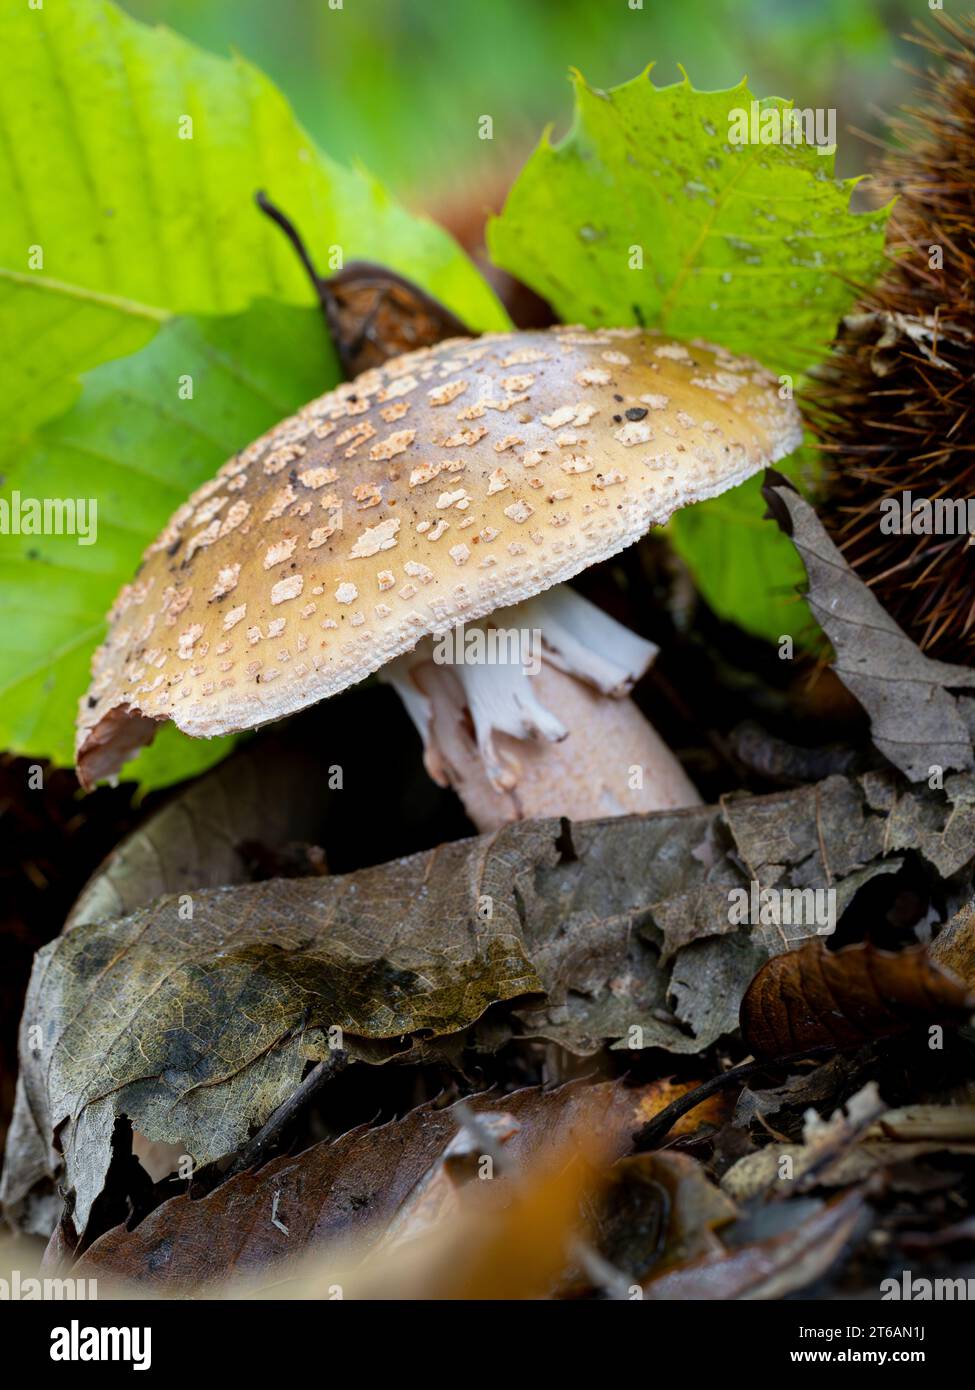 blushing amanita (Amanita rubescens) on a forest floor with blurred background Stock Photo